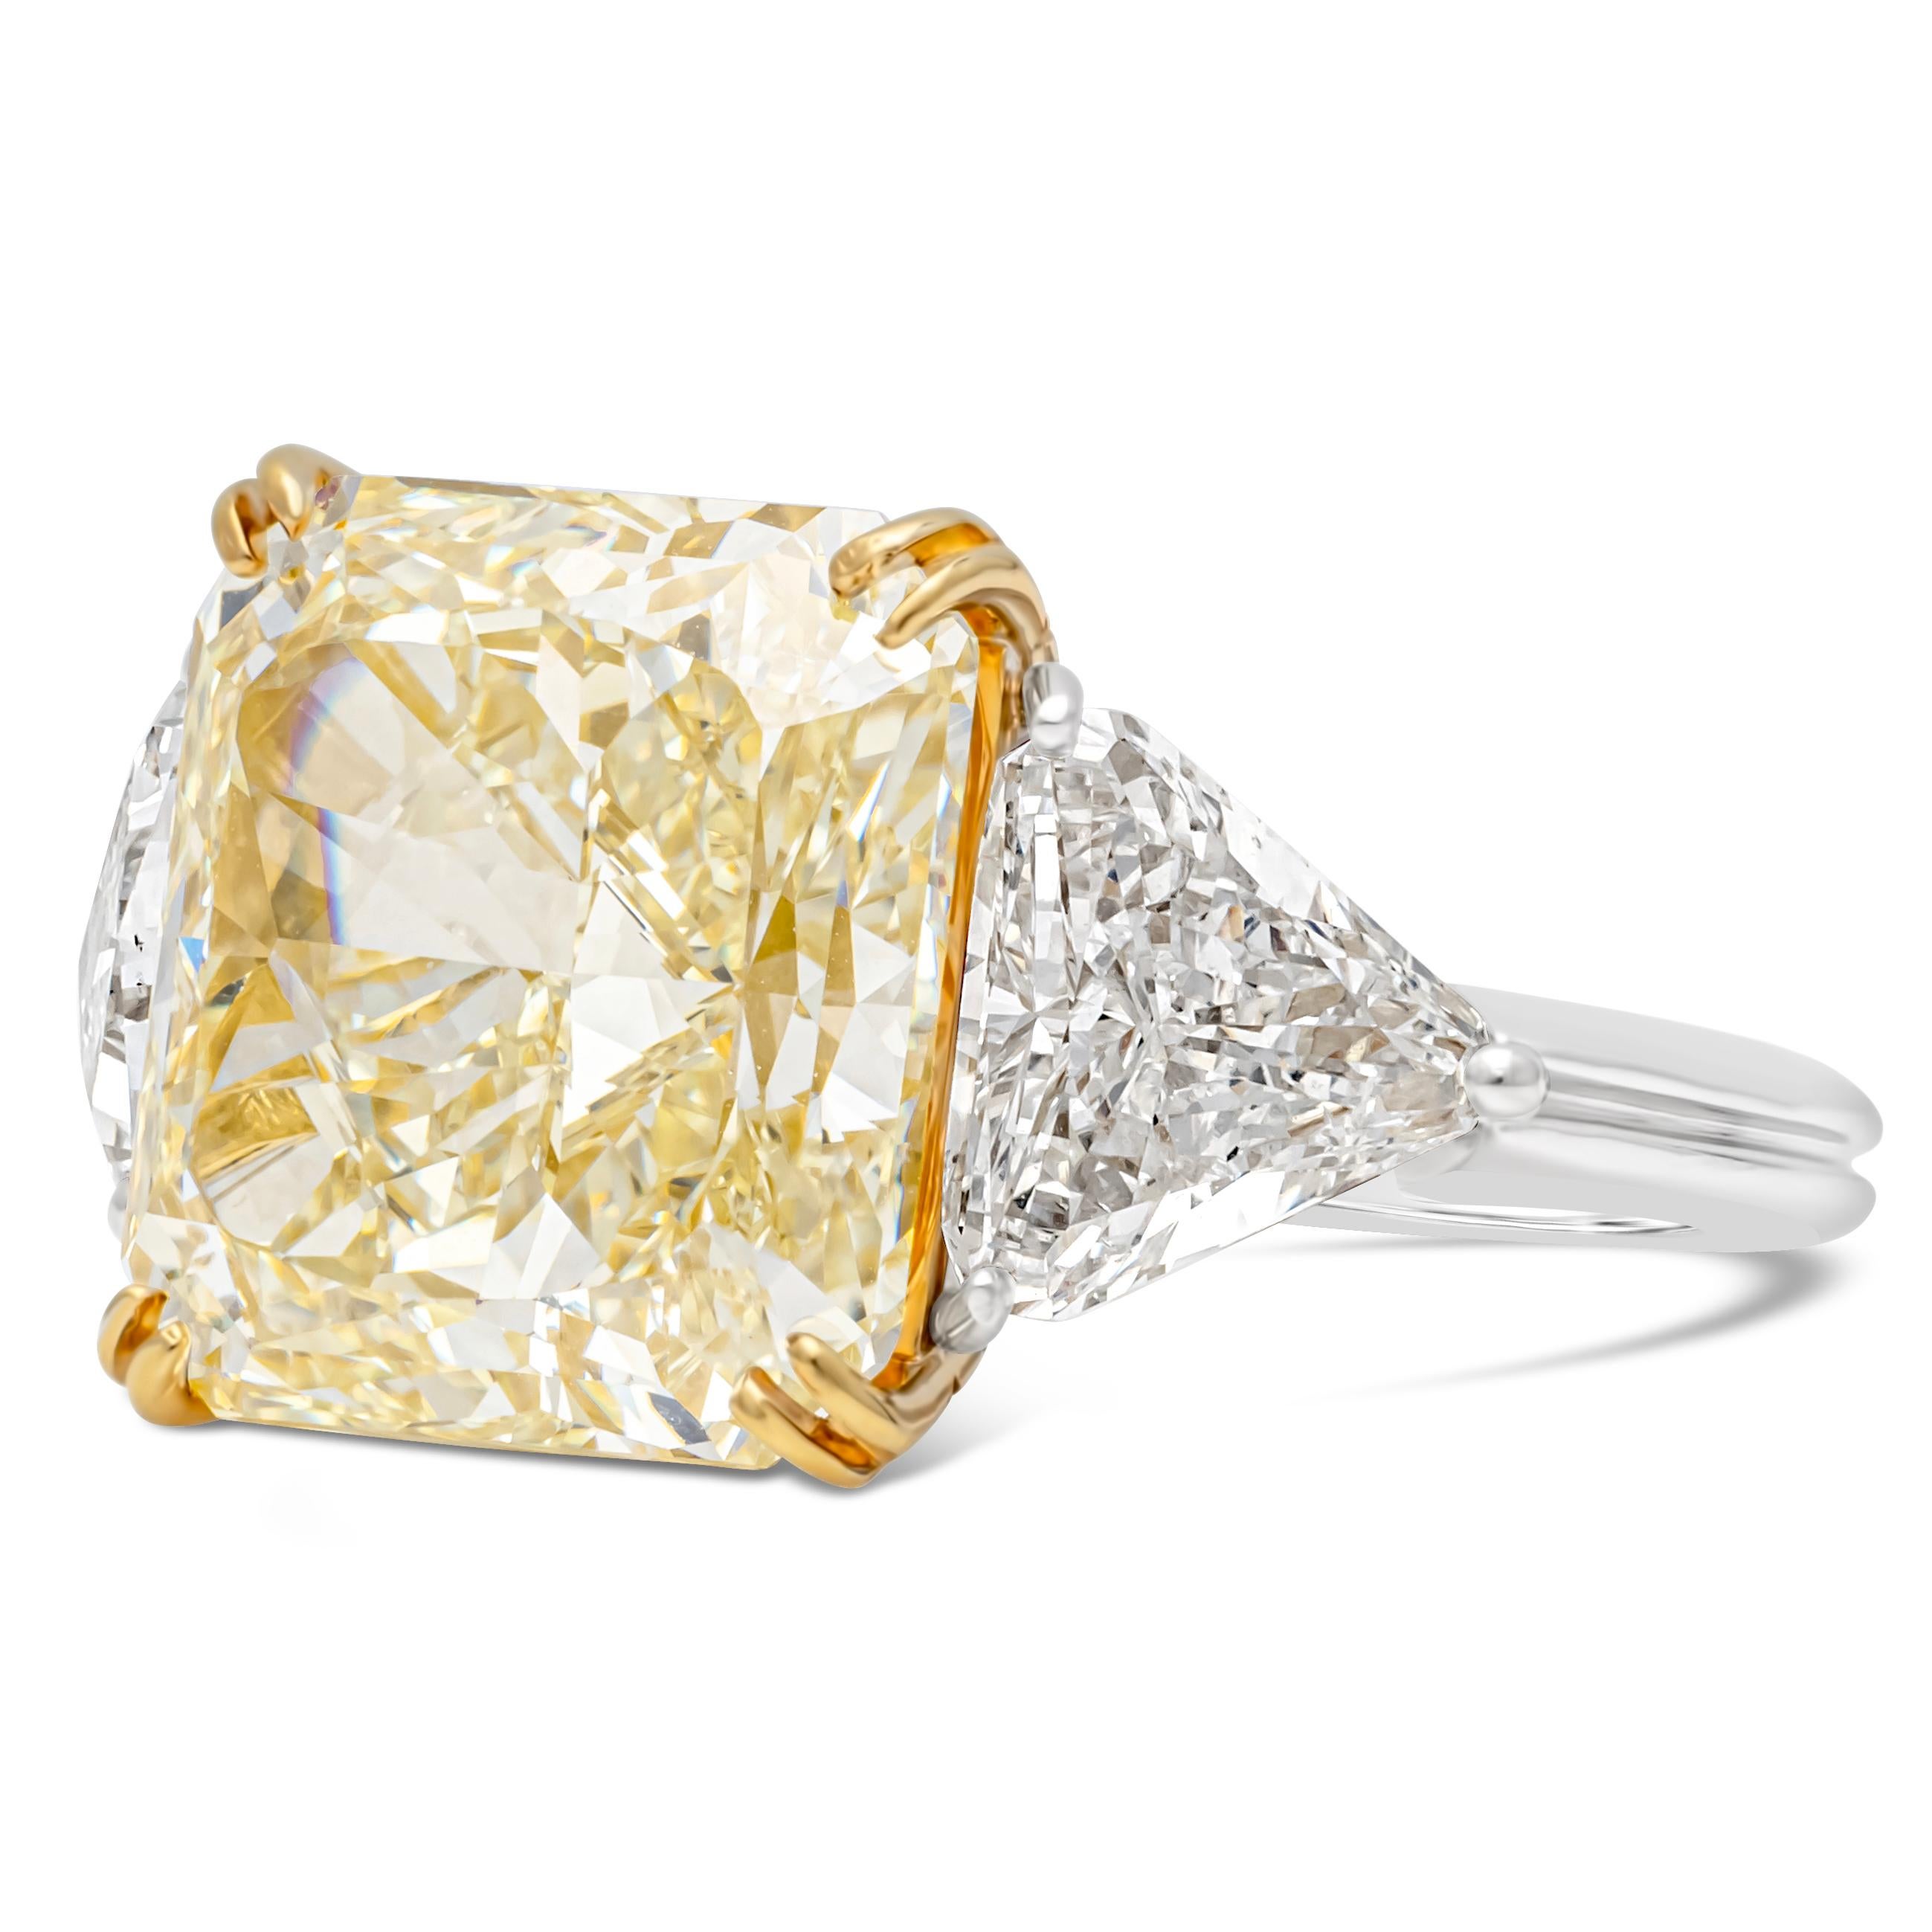 A color-rich three-stone engagement ring created by Oscar Heyman, featuring a 9.03 carats radiant cut diamond certified by GIA as Fancy Yellow color and VVS1 clarity. Set on a classic eight prong 18K yellow gold basket setting and flanked by